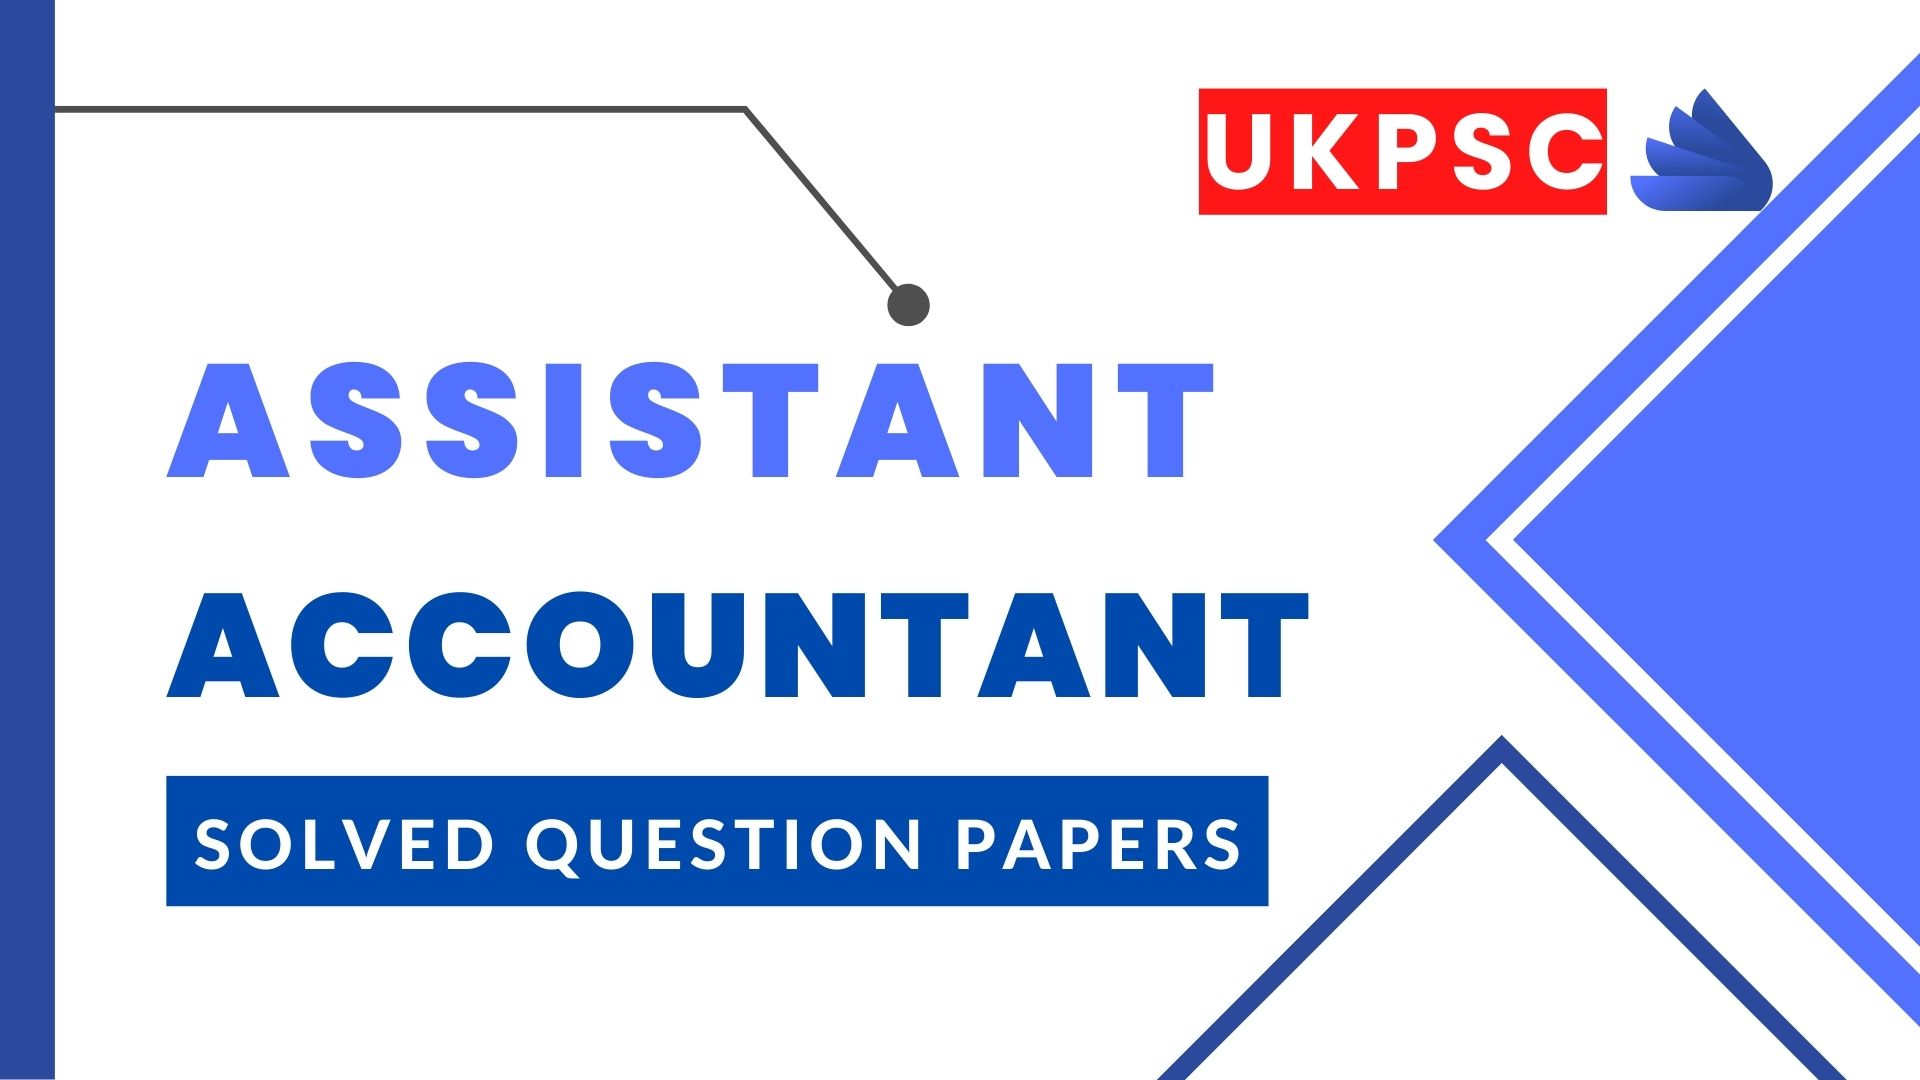 ukpsc assistant accountant solved paper 2018